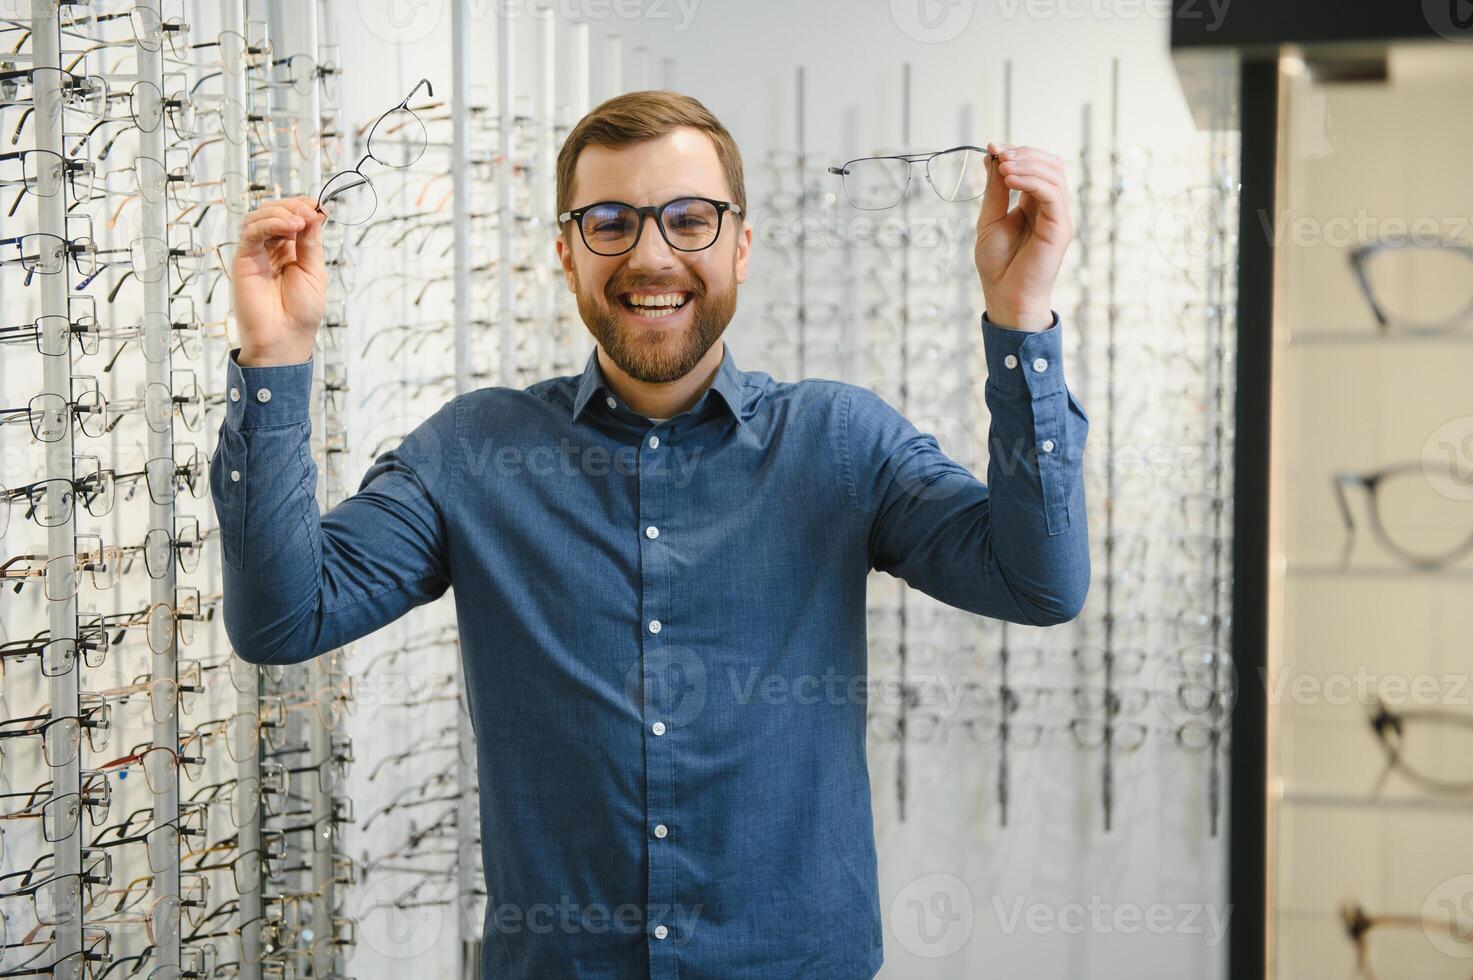 male client chooing new eyeglasses frame for his new eyeglasses in optical store photo